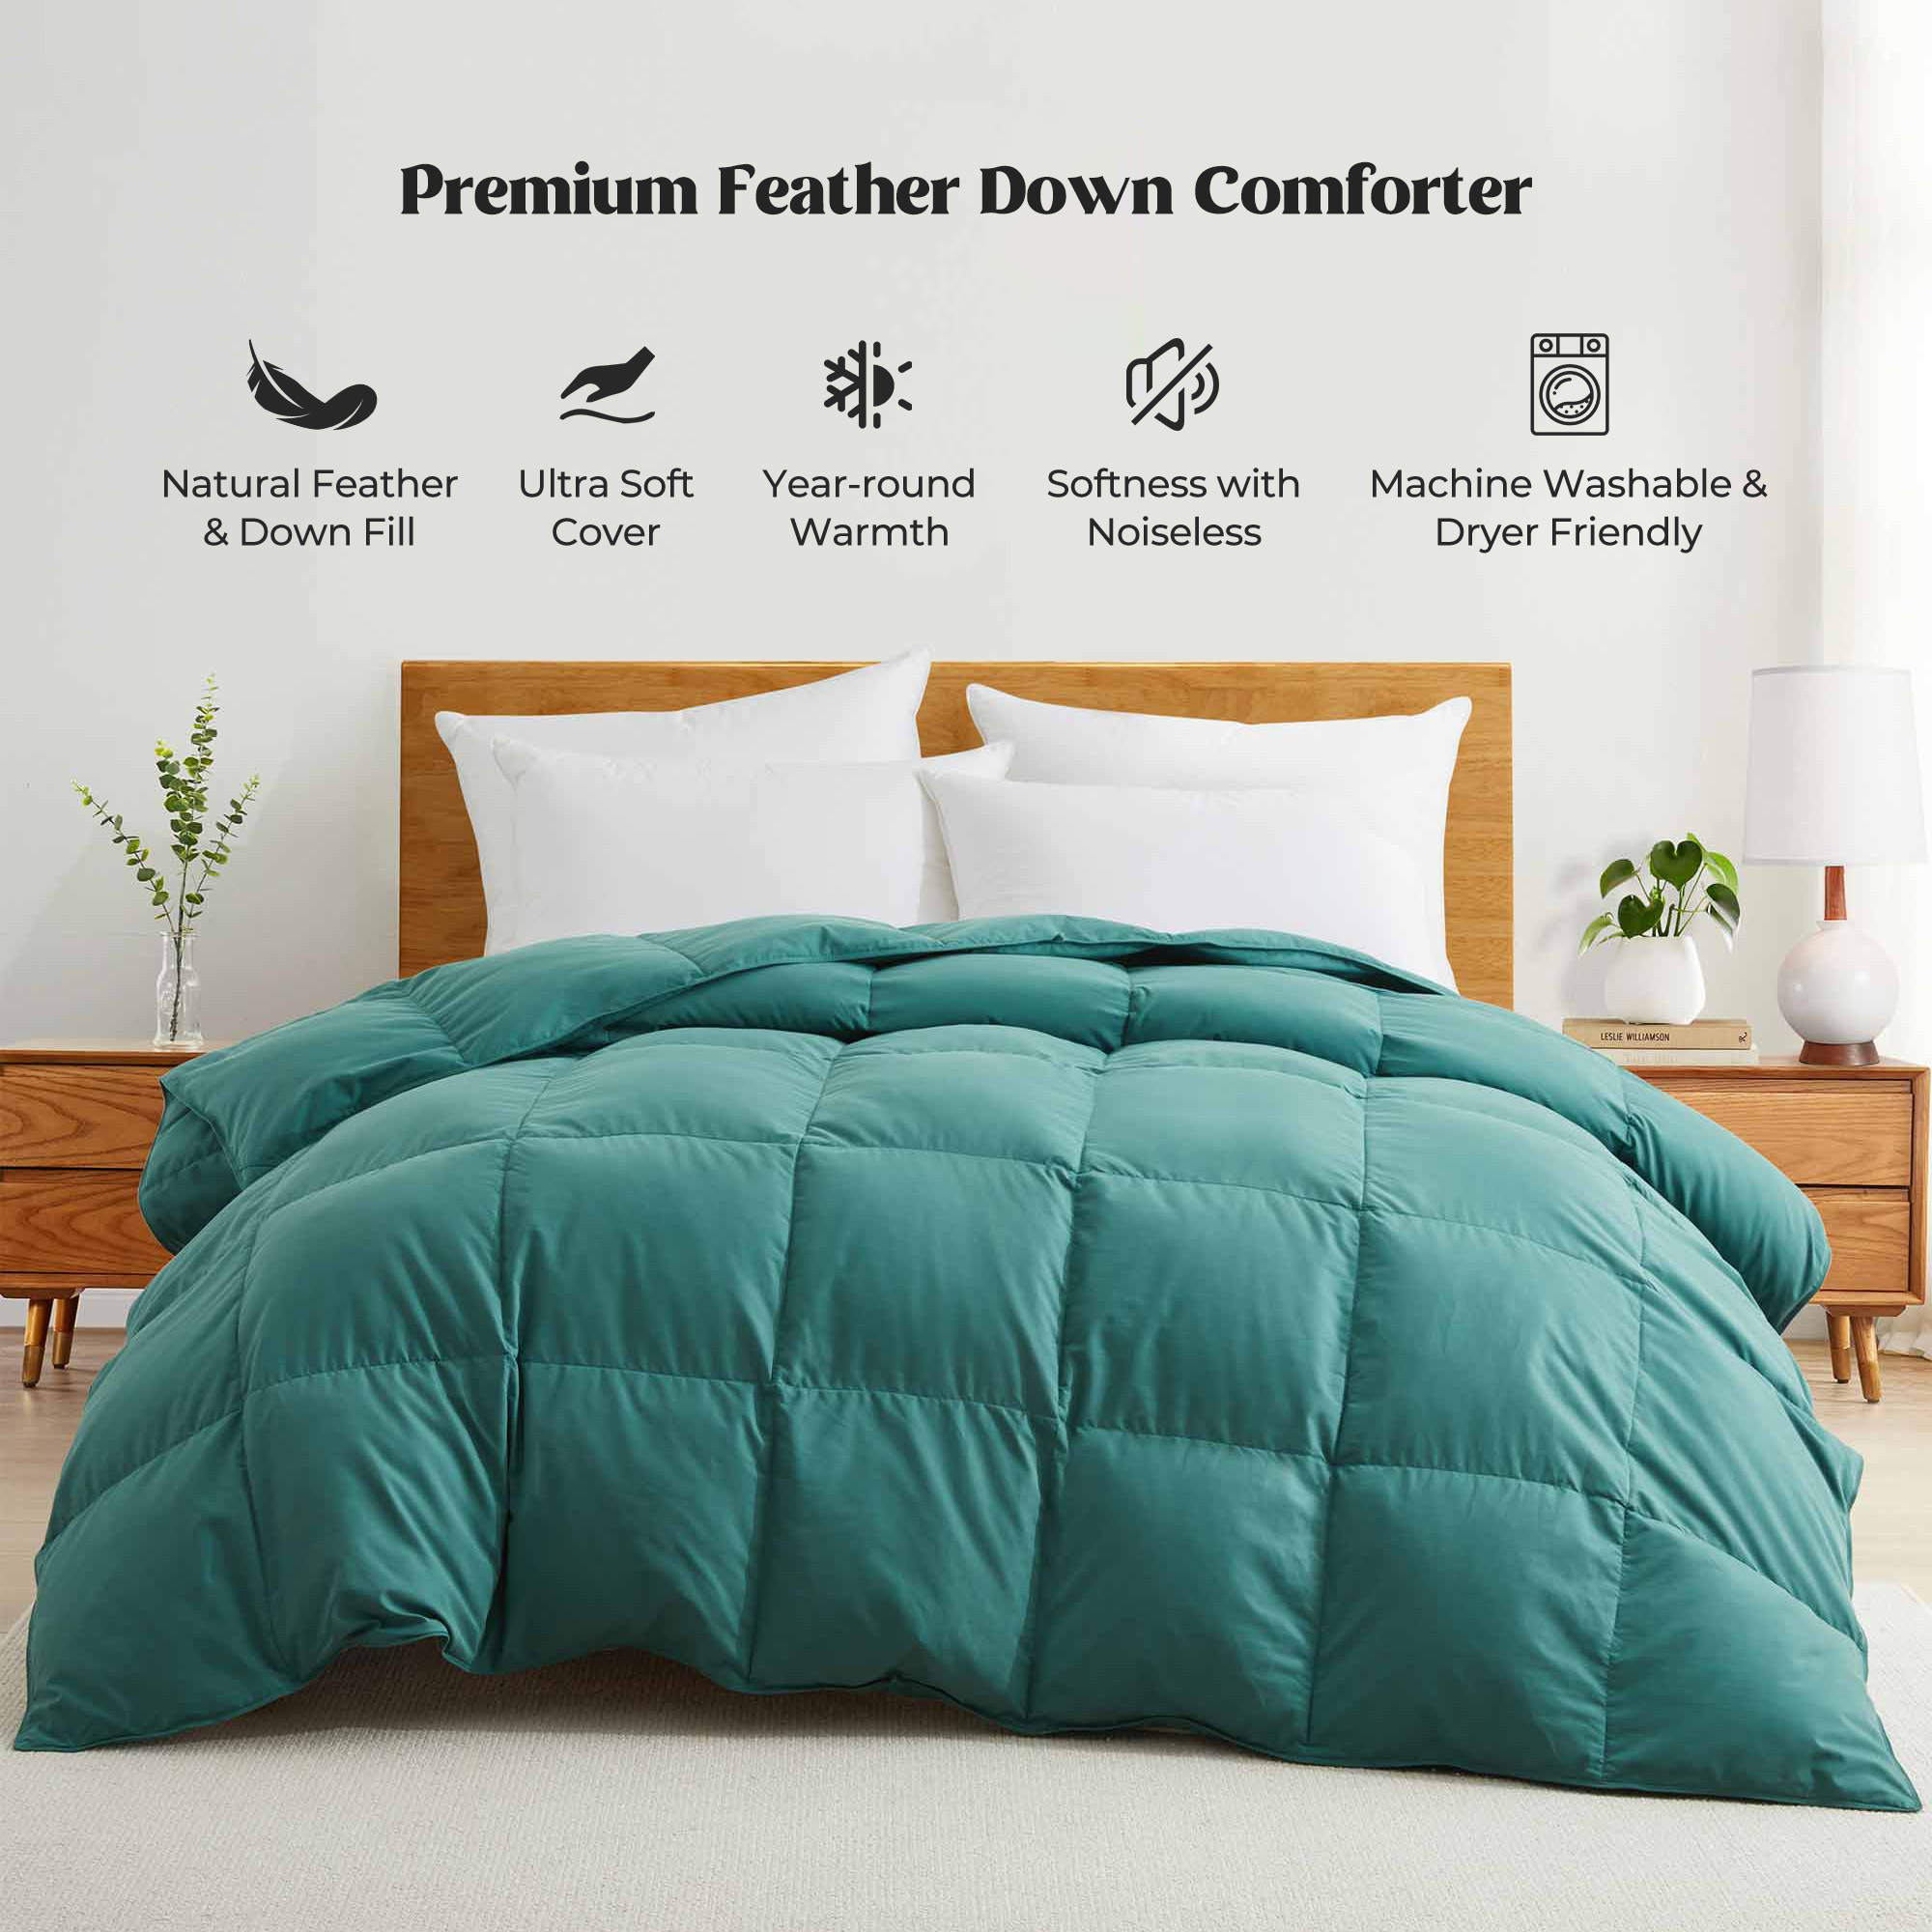 All Seasons Goose Down Feather Comforter Ultra Soft Comforter With Peach Skin Fabric - Laurel Green, King-104*88